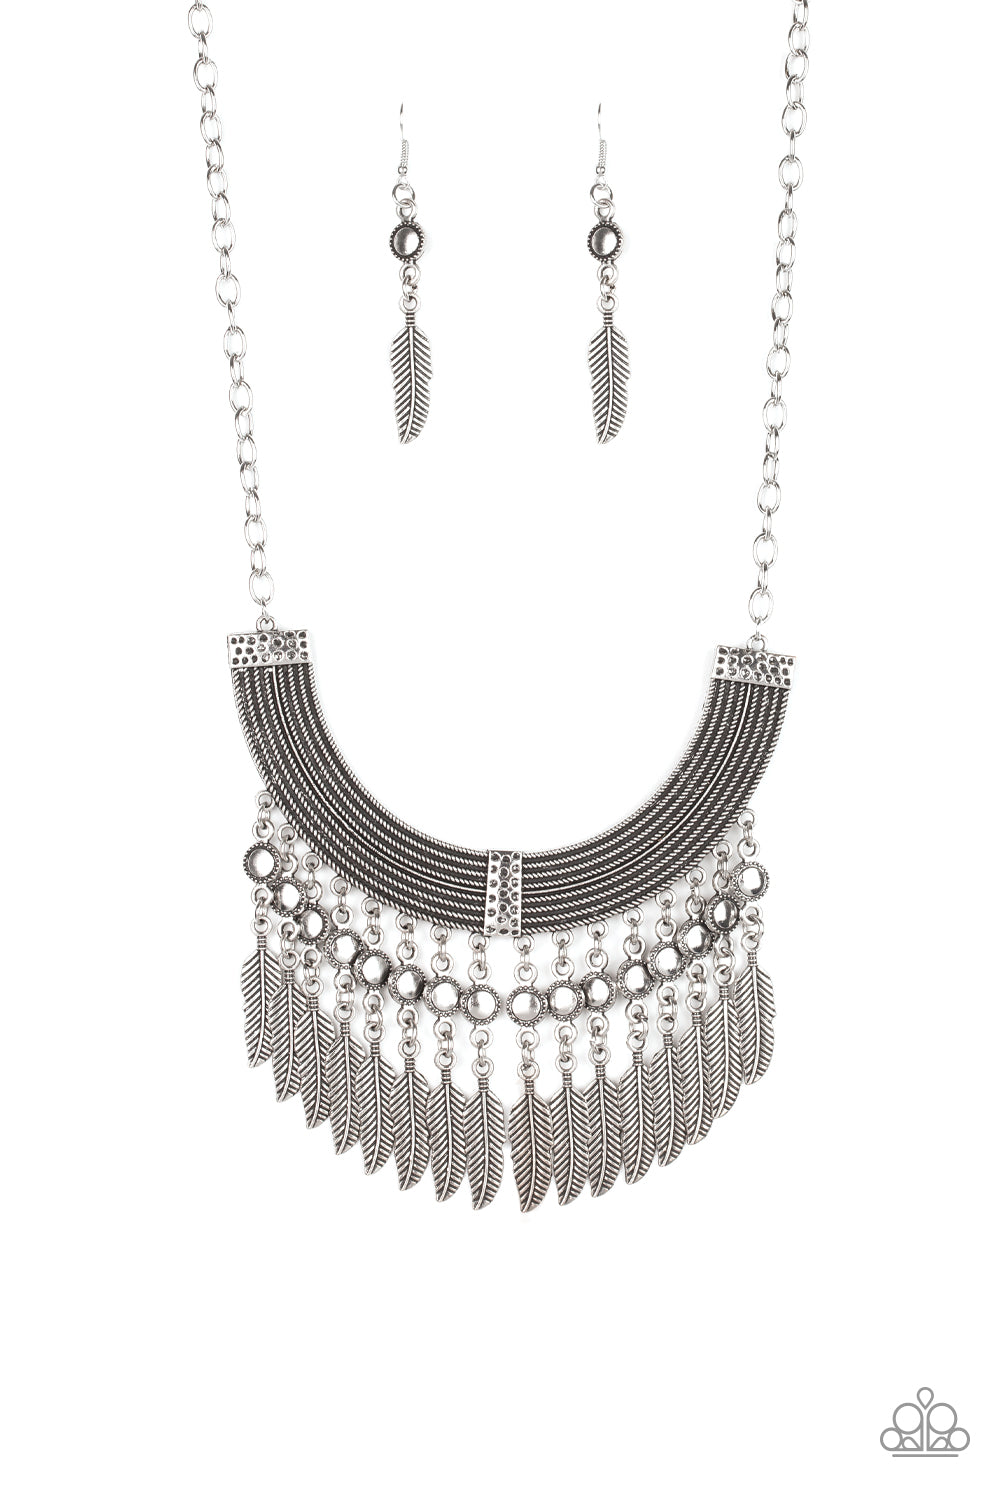 Paparazzi Accessories Fierce in Feathers - Silver Necklace & Earrings